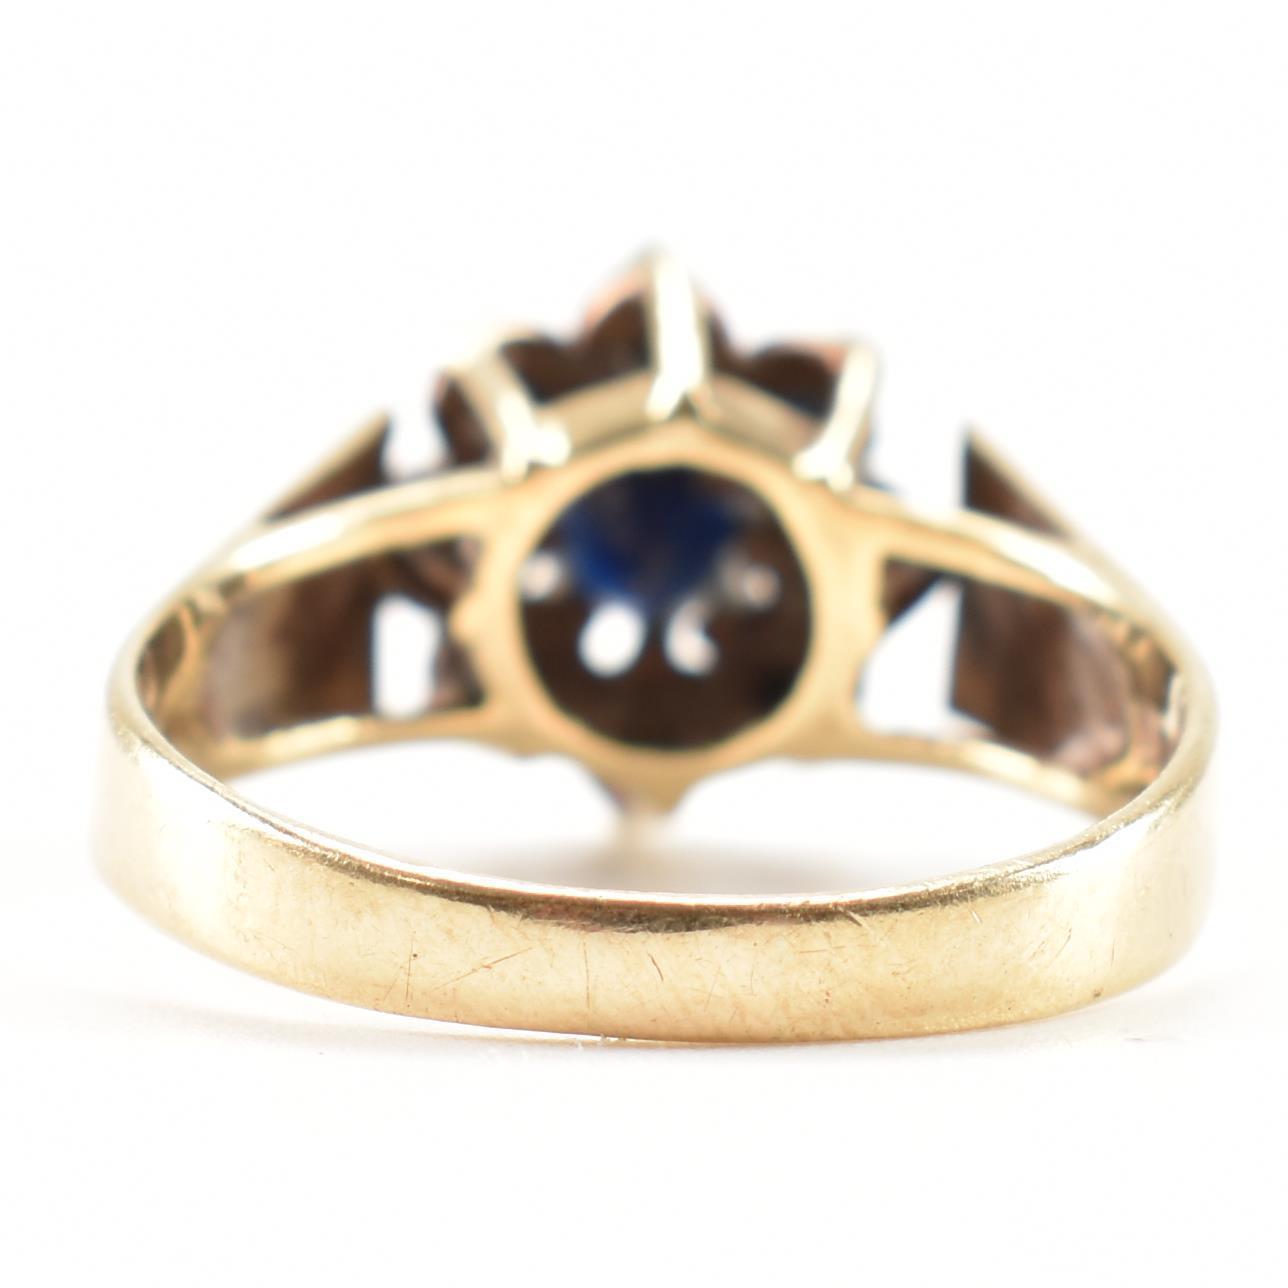 HALLMARKED 9CT GOLD SAPPHIRE & DIAMOND CLUSTER RING - Image 3 of 10